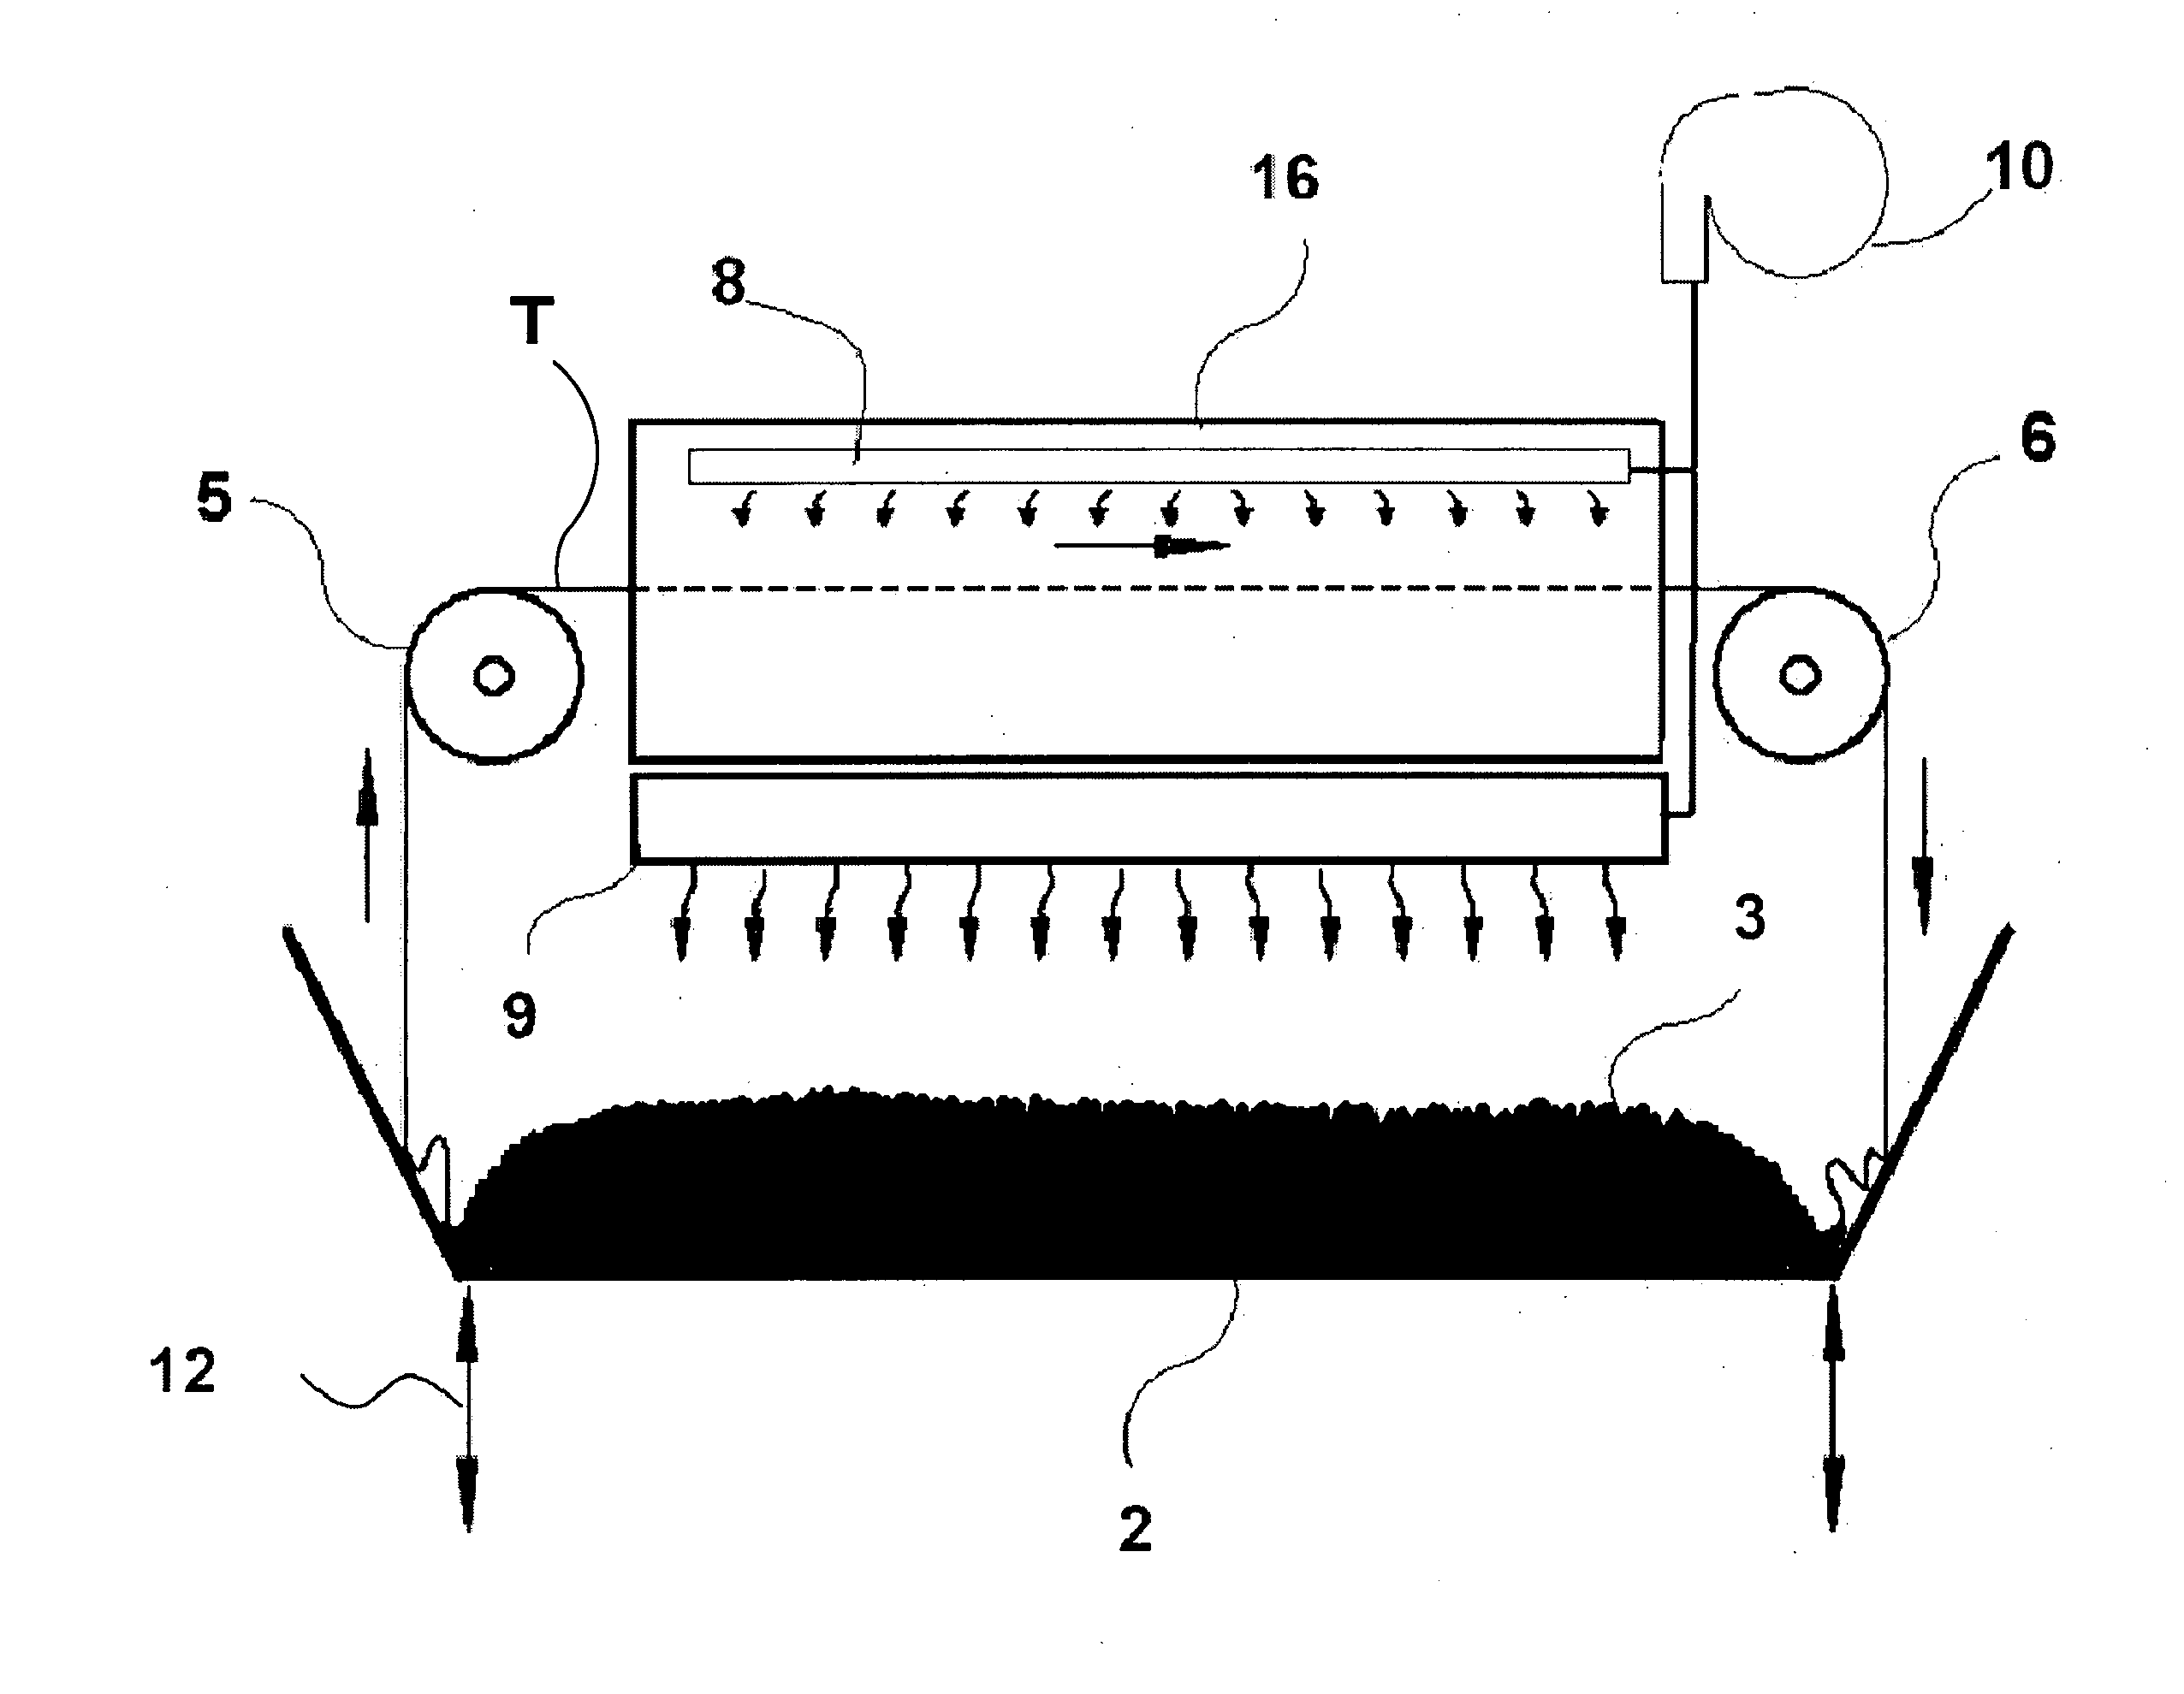 Machine and method for the combined mechanical and heat treatment of fabrics, especially knitted fabrics